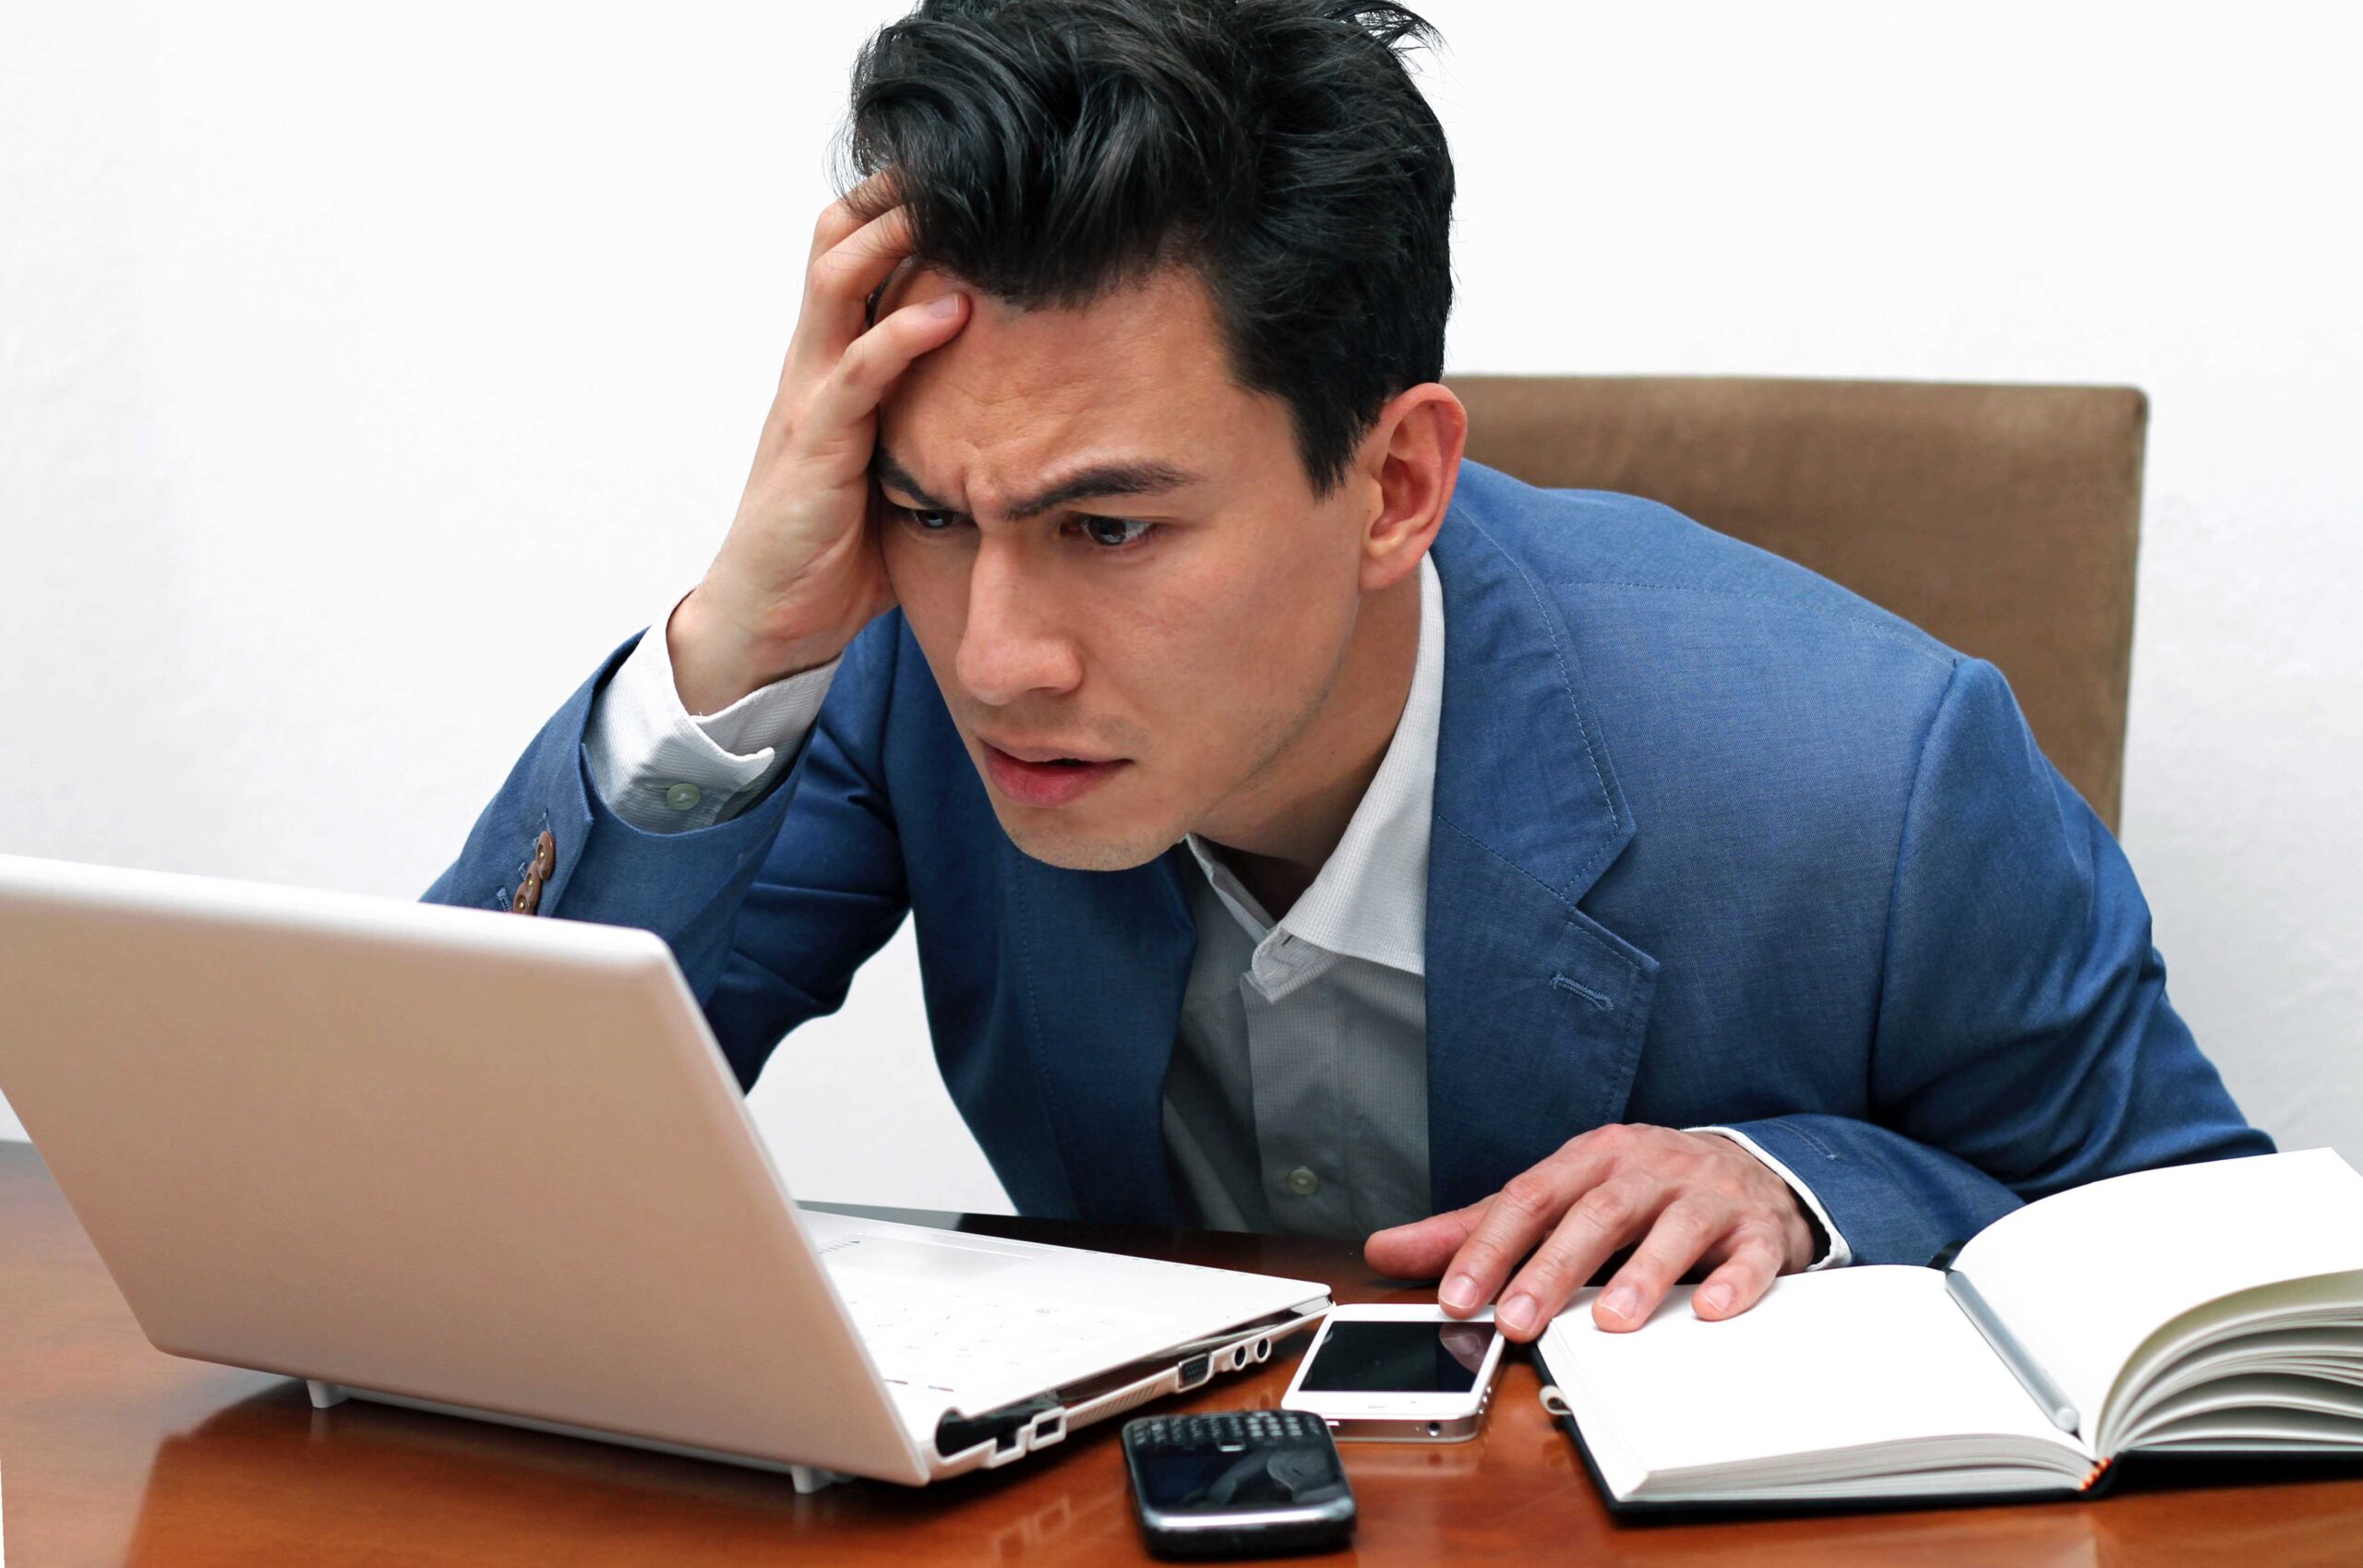 Photo of a man in a suit looking exasperated at his laptop